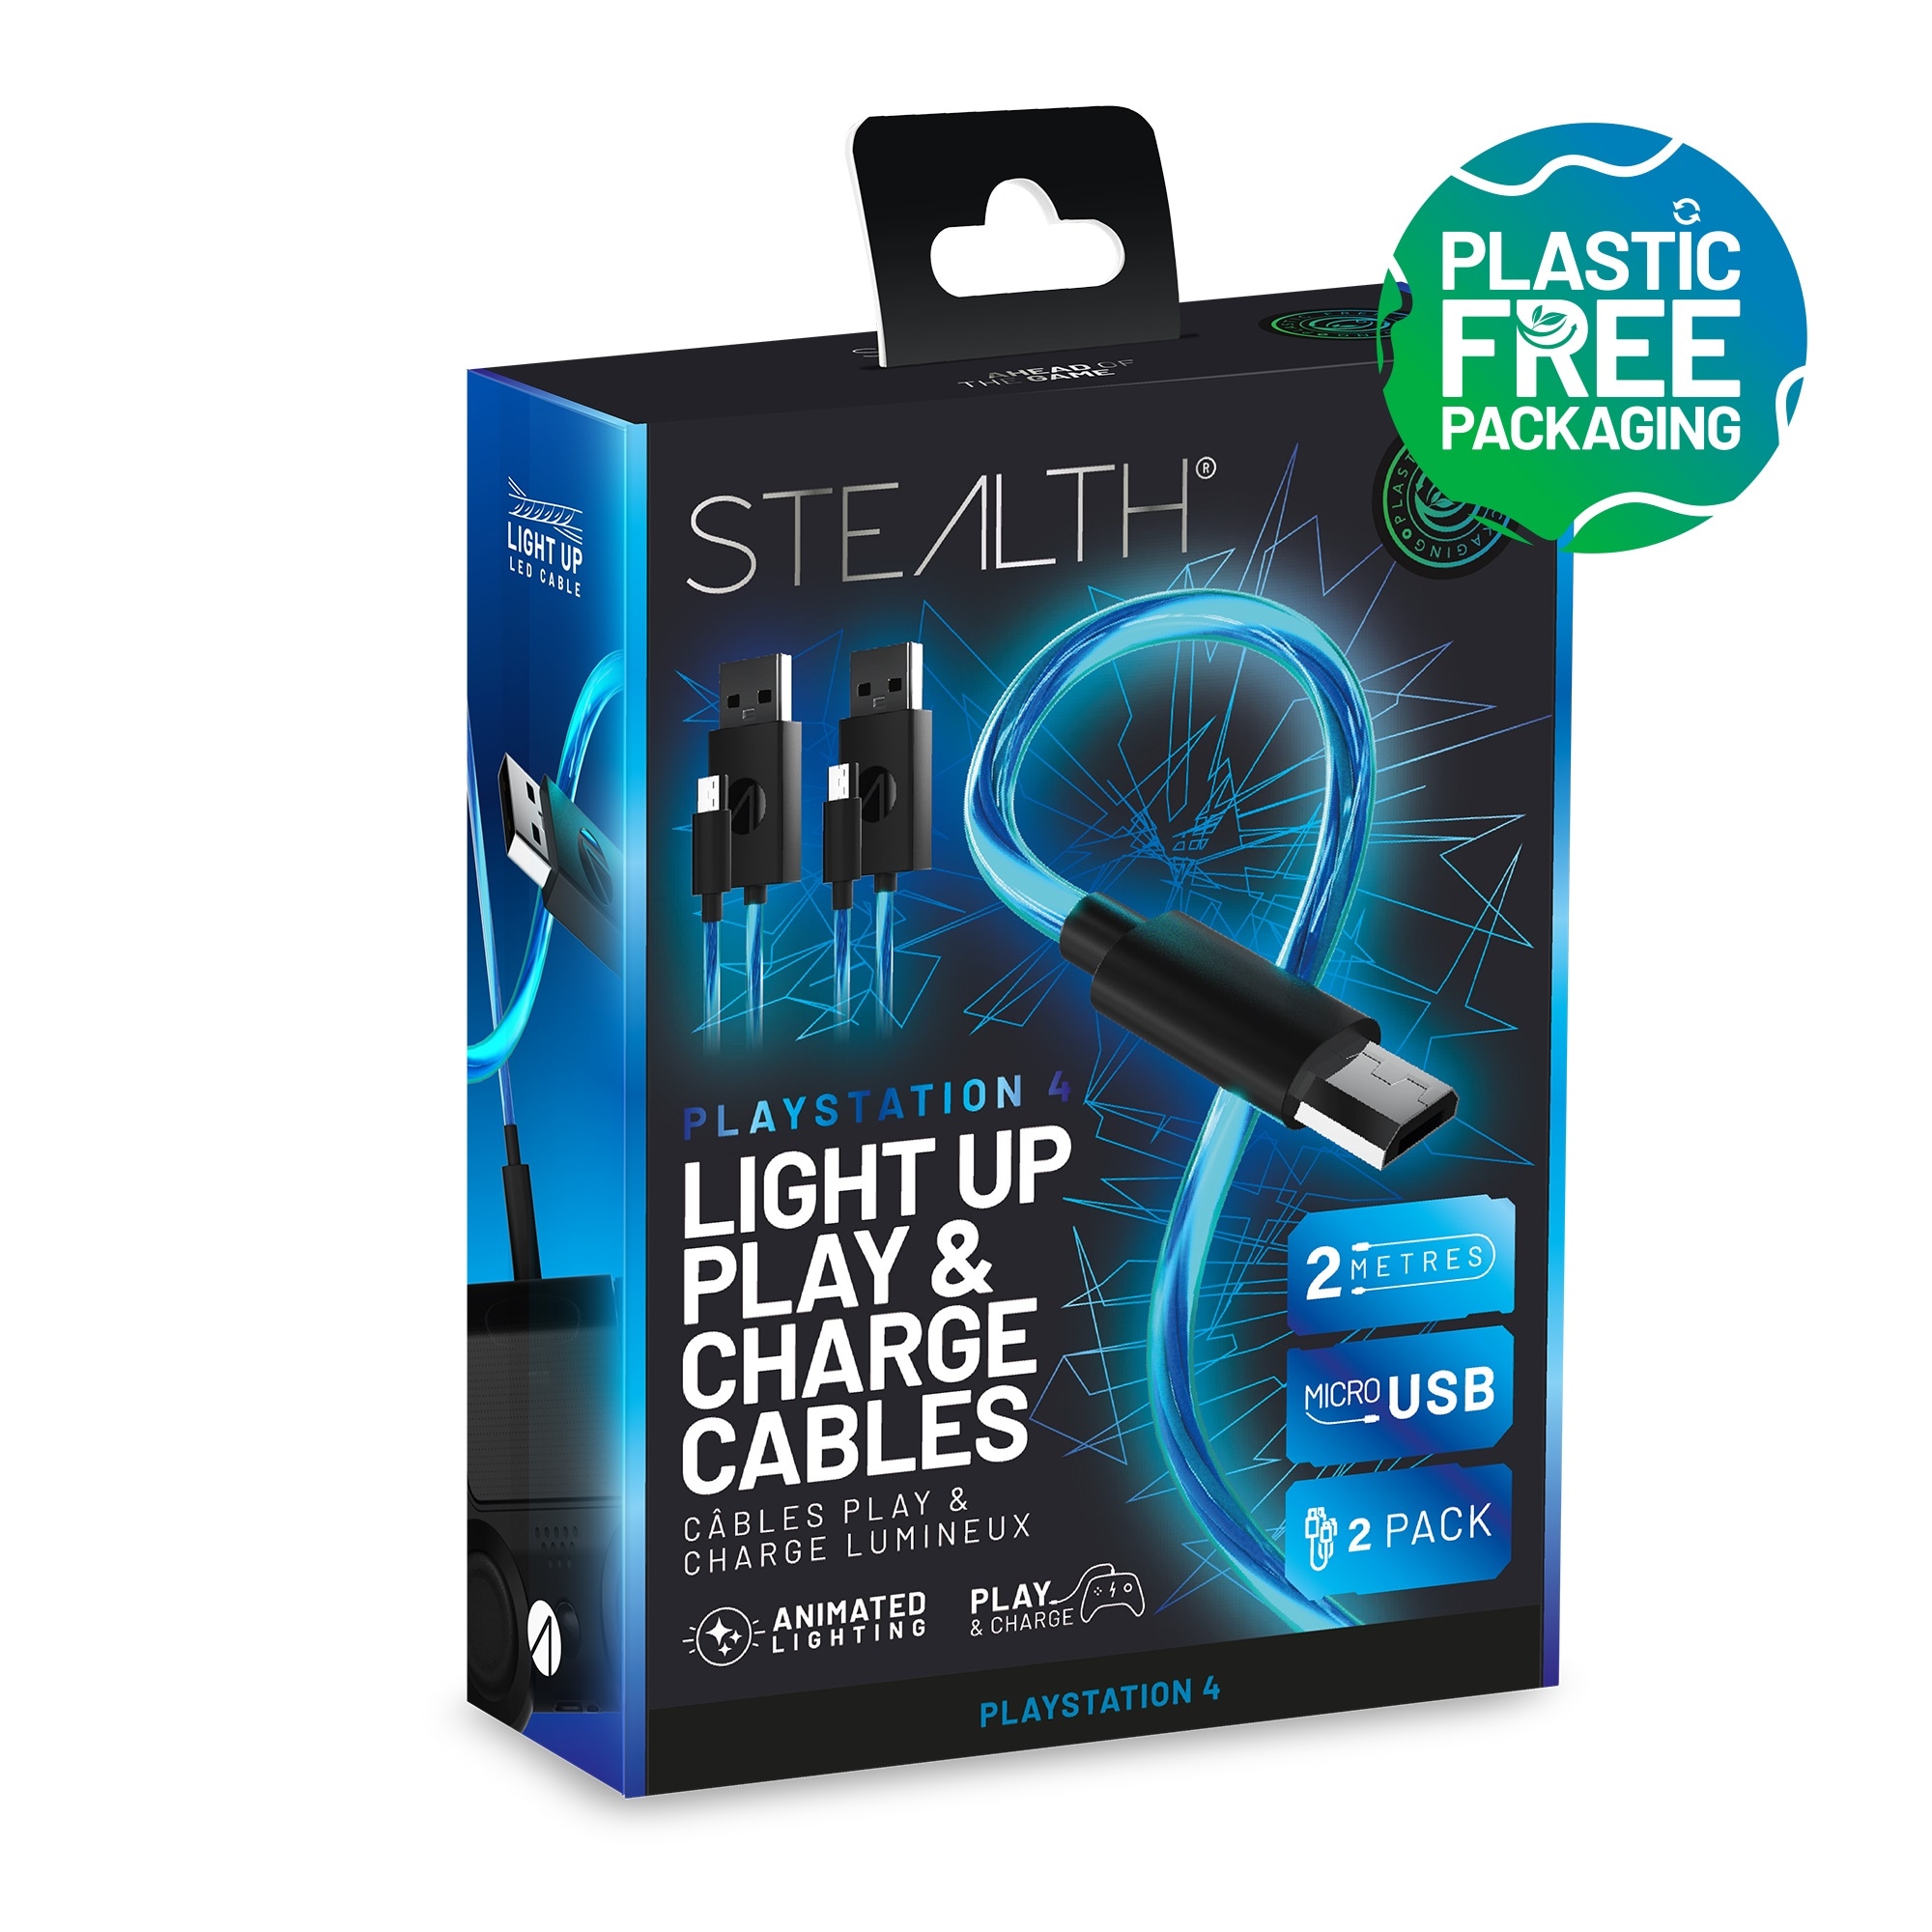 USB-Kabel »USB Kabel Doppelpack (2x 2m) Play&Charge mit LED Beleuchtung«, Micro-USB,...